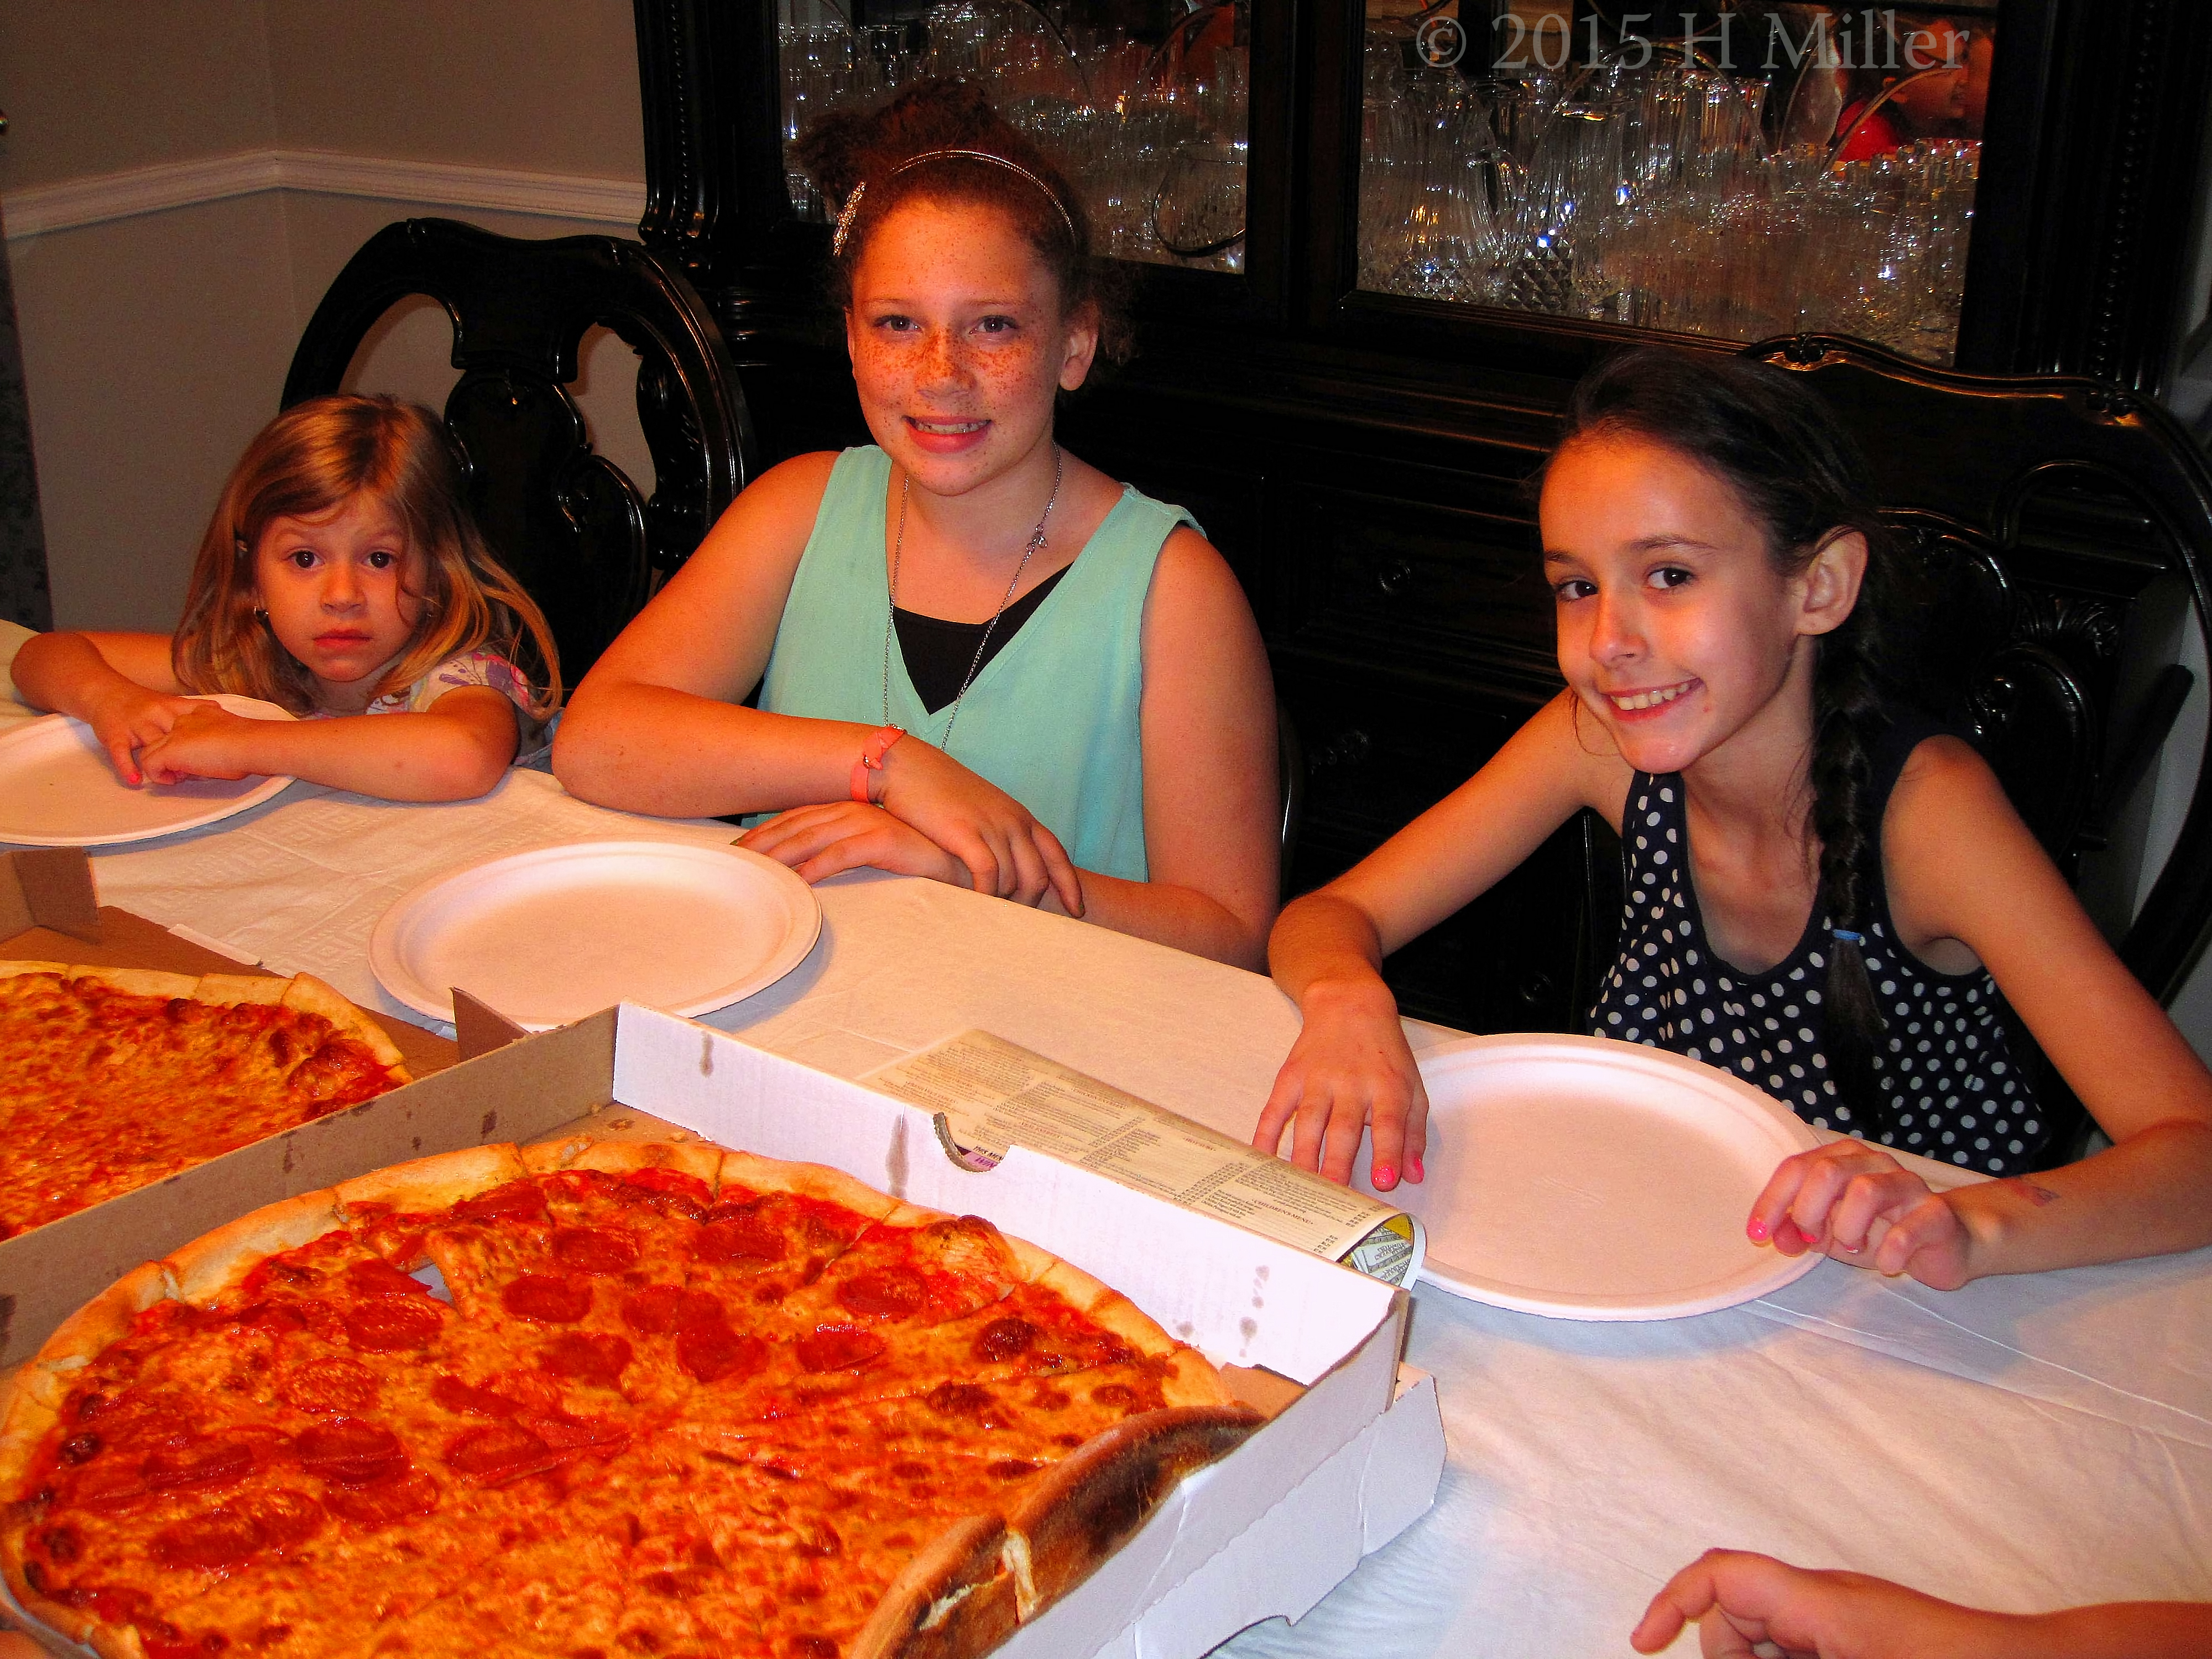 PIZZA! The Best Food For A Girls Sleepover Spa!! 